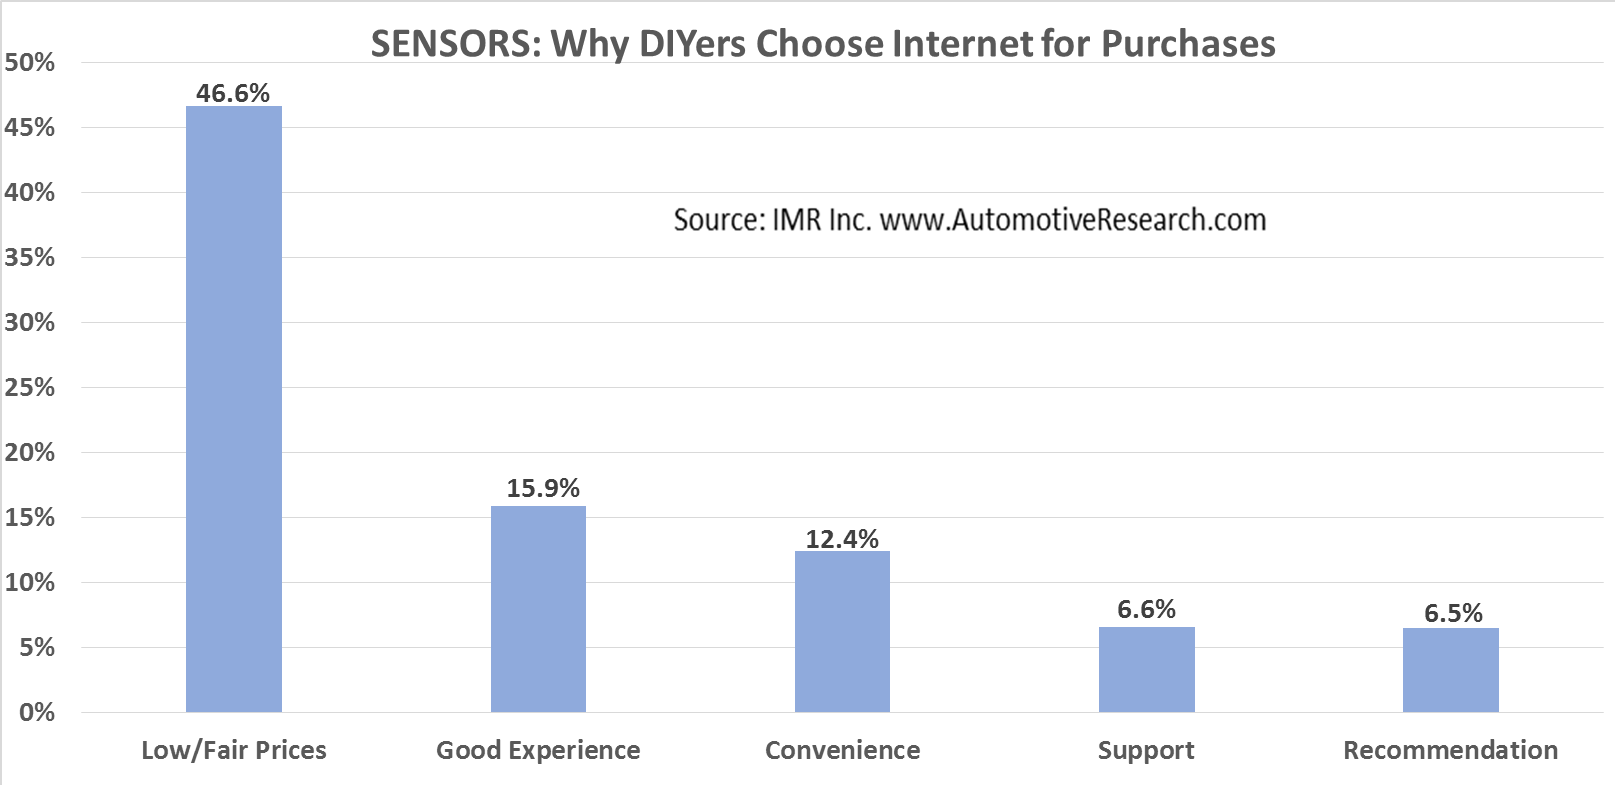 Automotive Market Research Study - Why DIYers Choose Internet For Vehicle Sensor Purchases